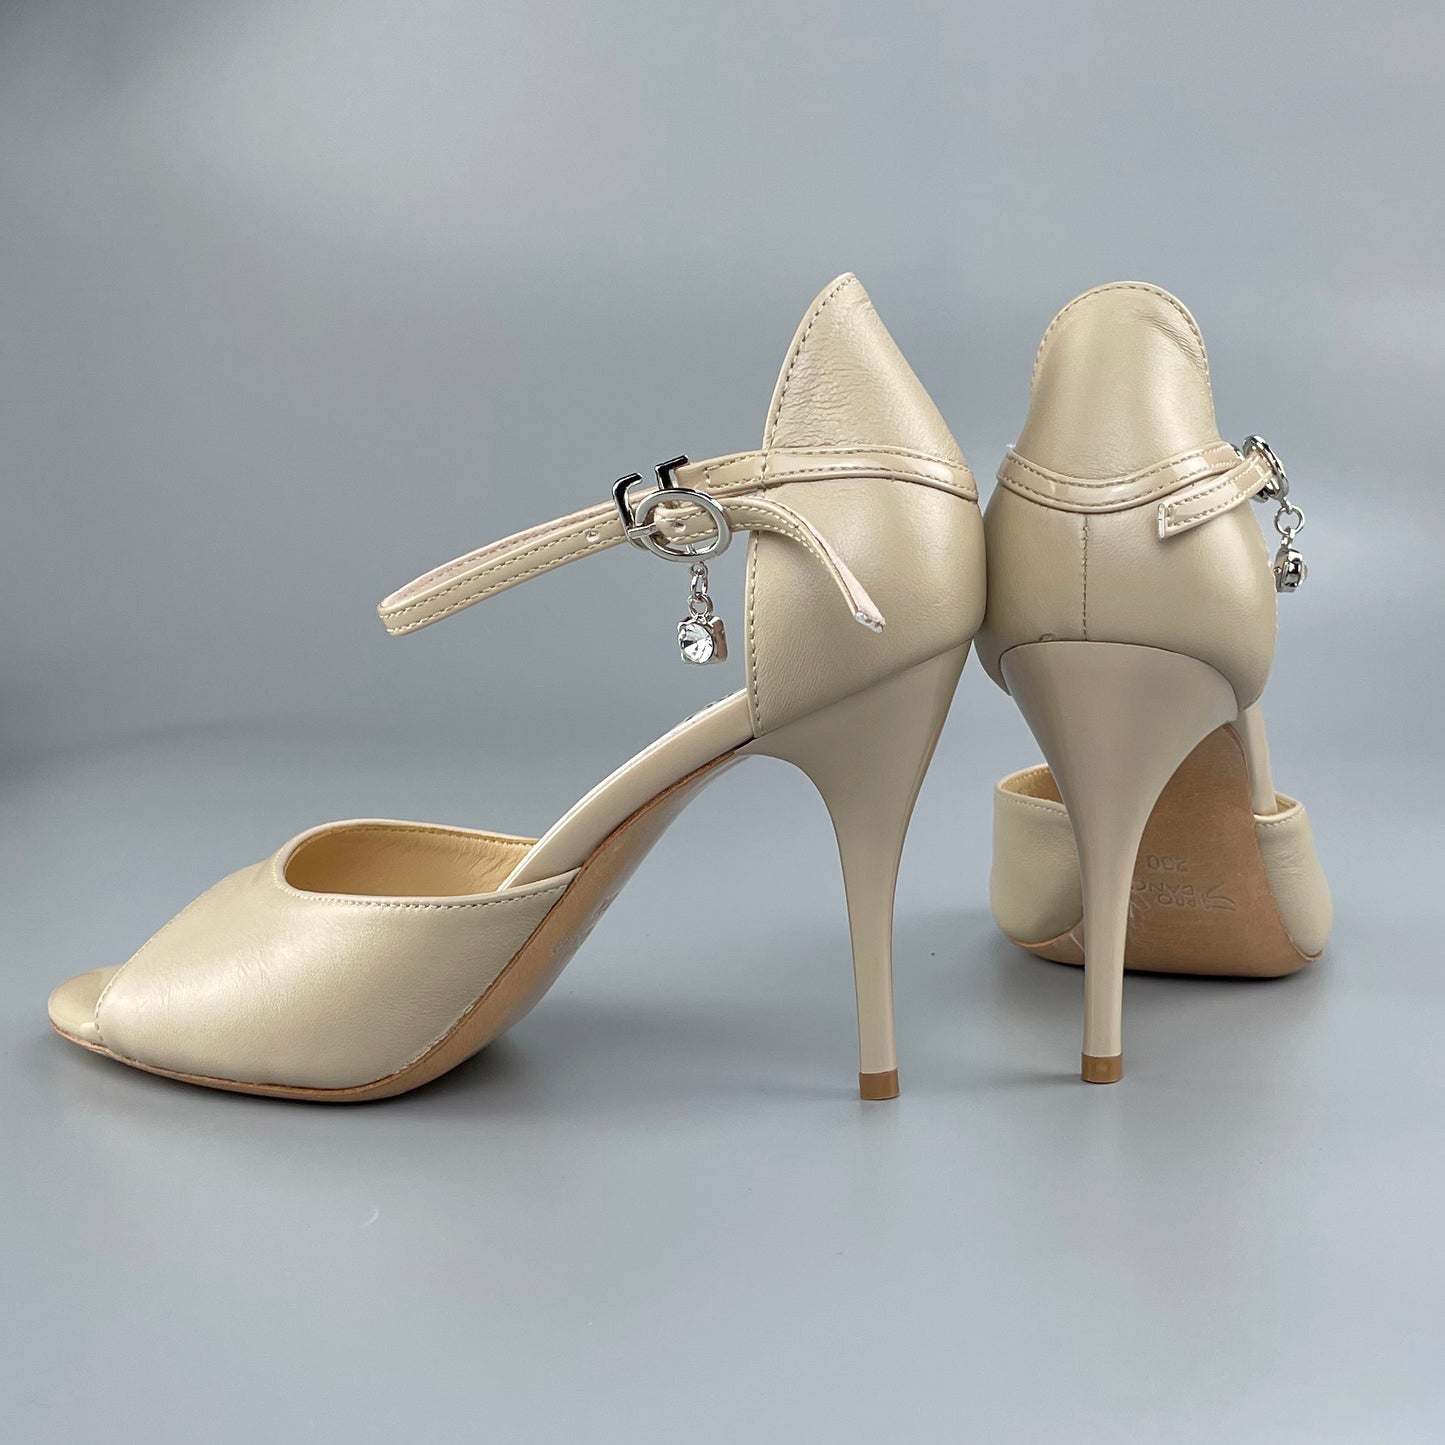 Pro Dancer Open-toe and Closed-back Argentine Tango Shoes High Salsa Heels Hard Leather Sole Sandals Nude (PD-9043B)